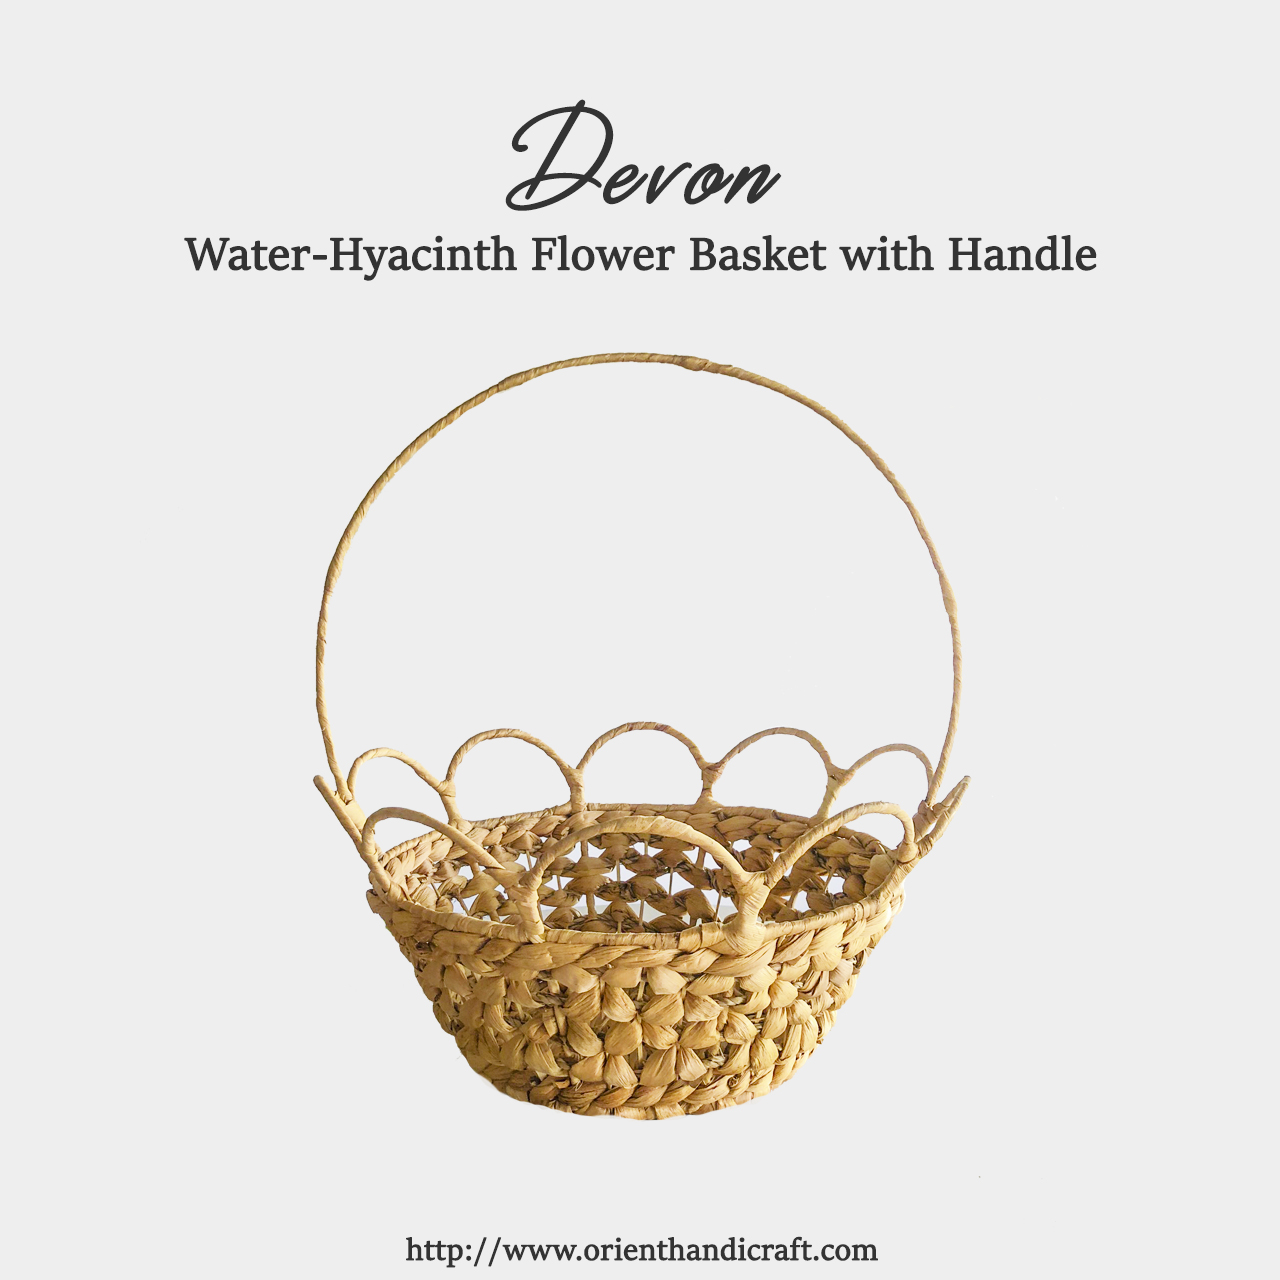 Water Hyacinth Flower Basket with Handle